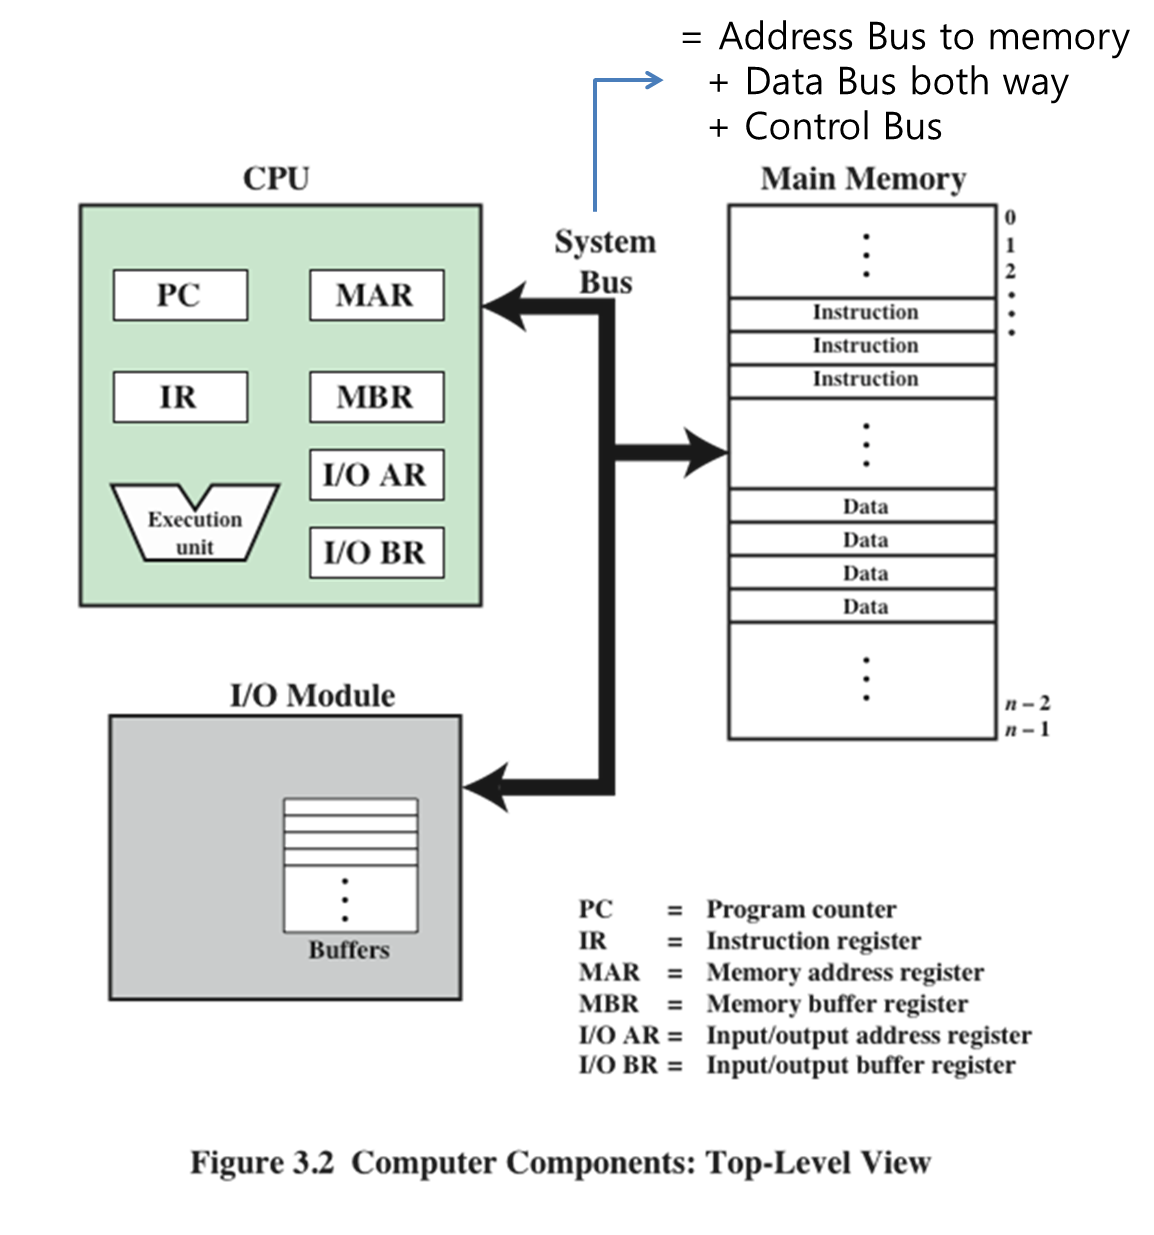 Akpil's programming story: Computer Architecture. chap3. A Top-Level